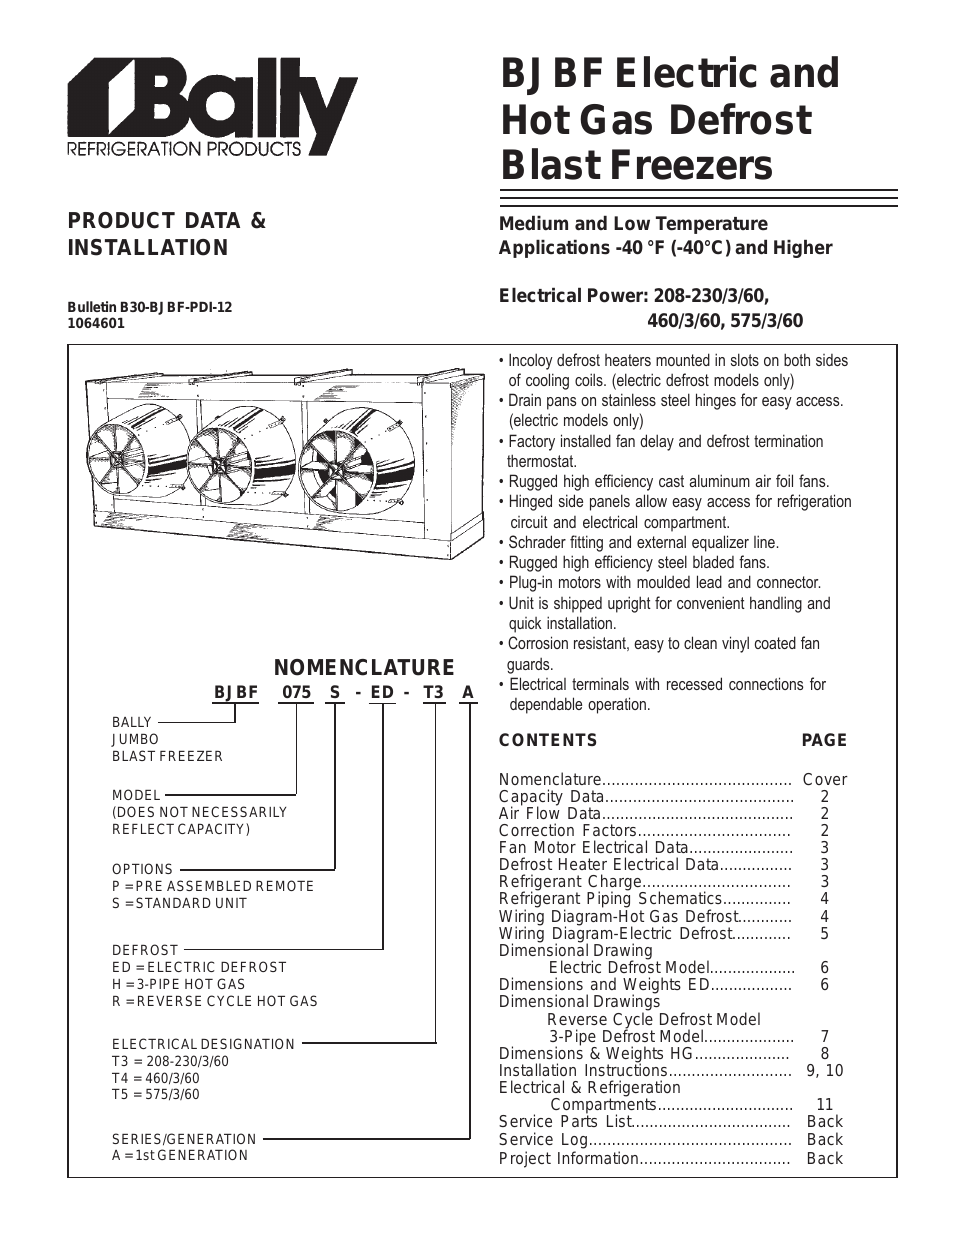 BJBF Electric, and Hot Gas Defrost Blast Freezers